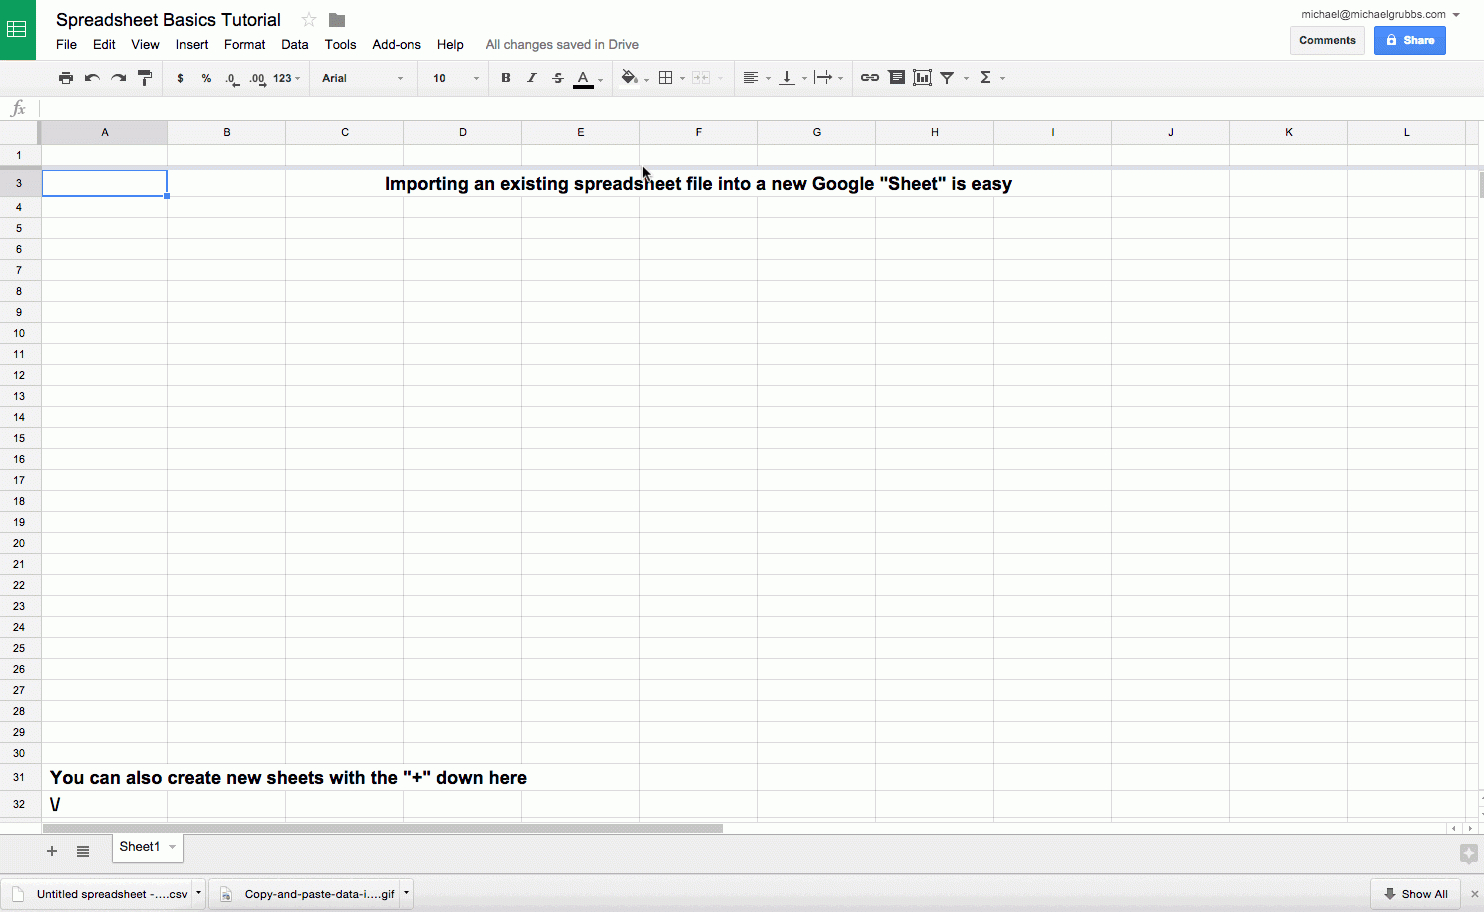 Spreadsheet Help Guide For Google Sheets 101: The Beginner's Guide To Online Spreadsheets  The